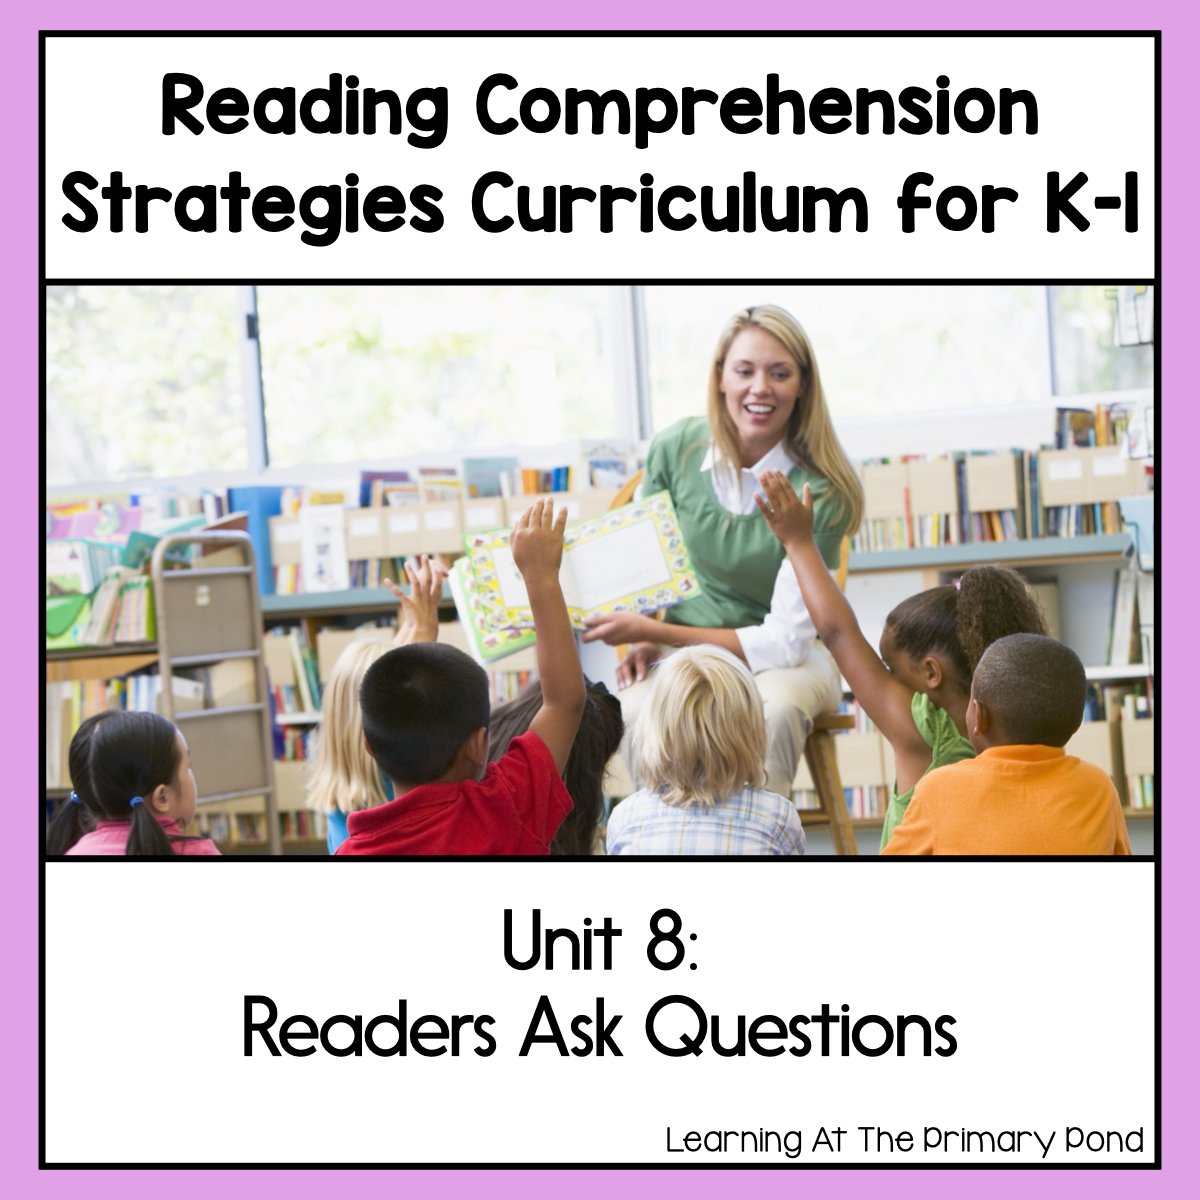 Reading Comprehension Lesson Plans for K-1 {Unit 8: Asking Questions} - learning-at-the-primary-pond